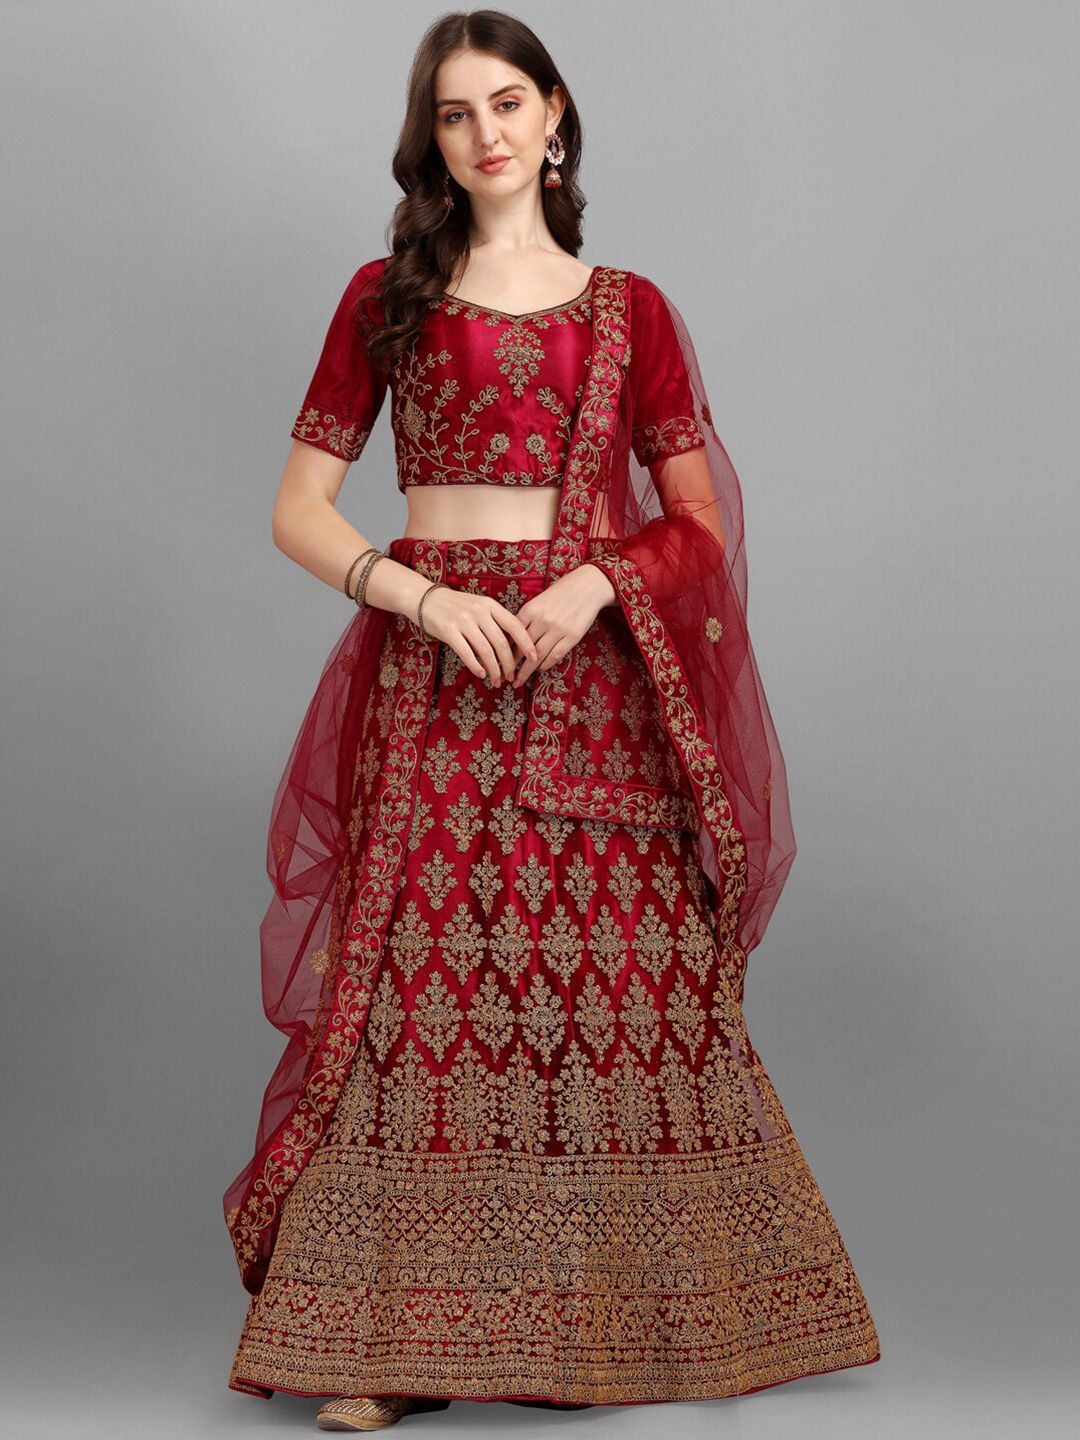 LABEL AARNA Red & Brown Embroidered Semi-Stitched Lehenga & Unstitched Blouse With Dupatta Price in India